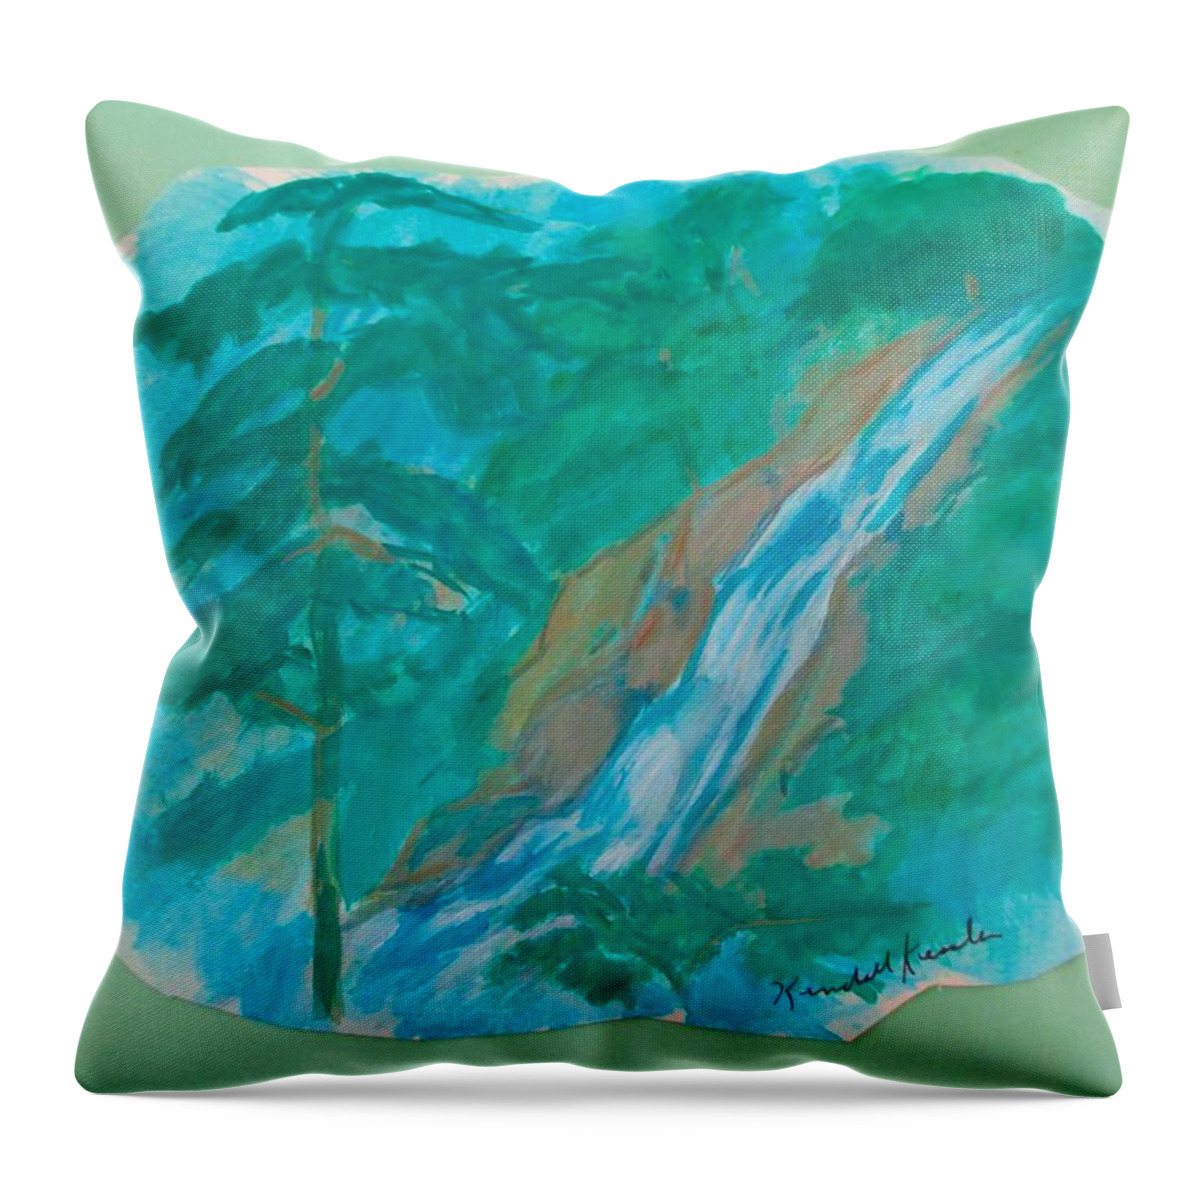 Waterfall Throw Pillow featuring the painting Cascading Beauty by Kendall Kessler